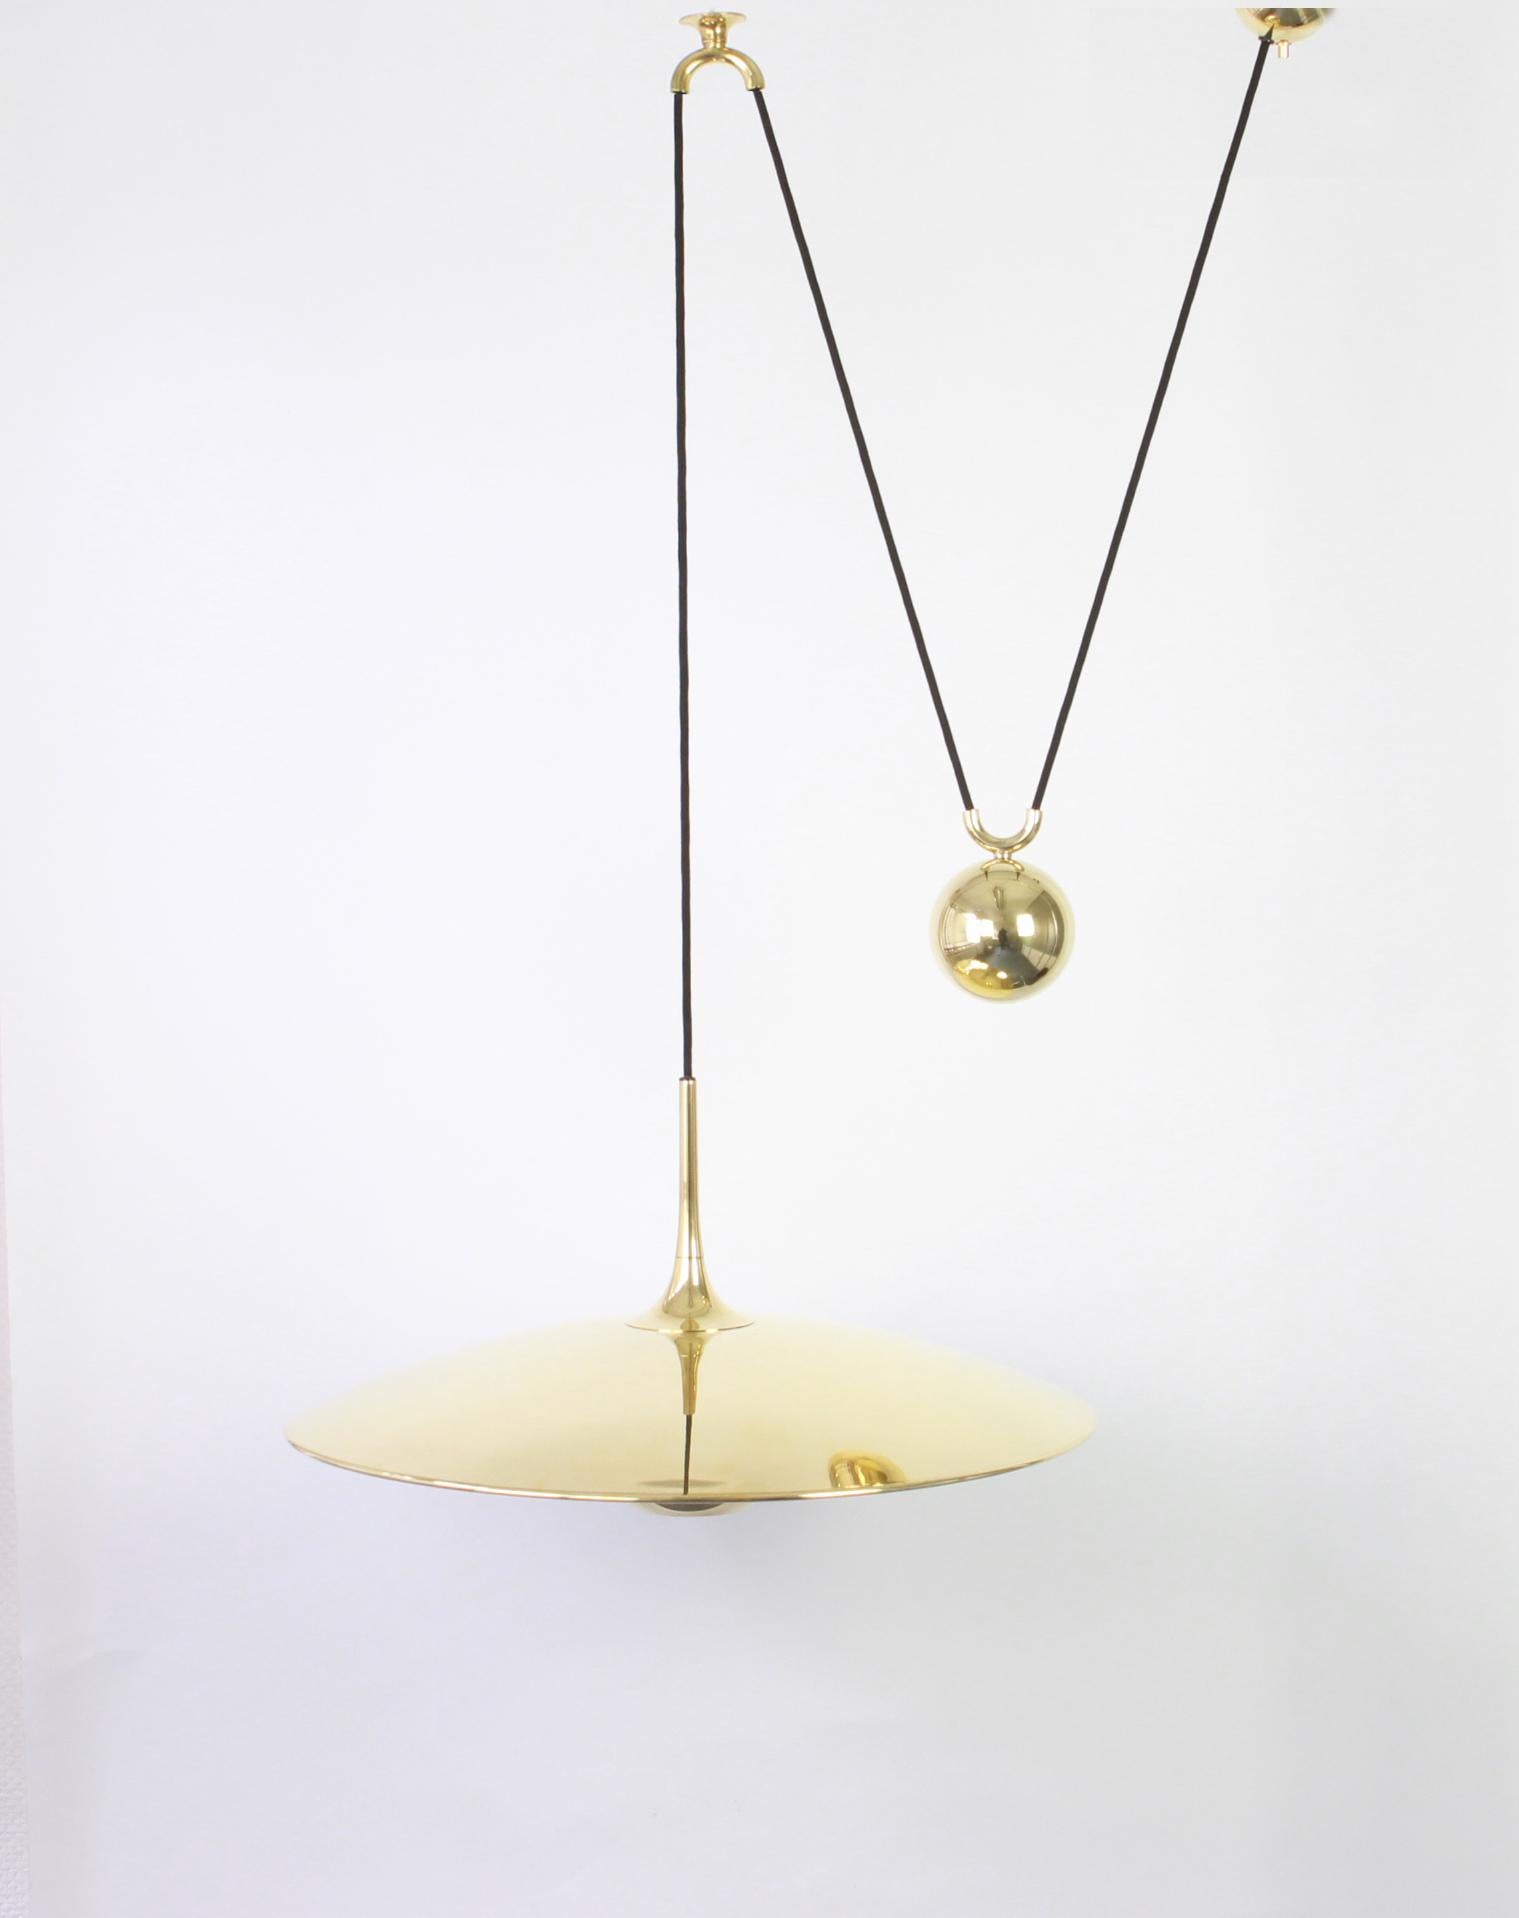 Mid-Century Modern 1 of 2 Adjustable Brass Counterweight Pendant Light by Florian Schulz, Germany